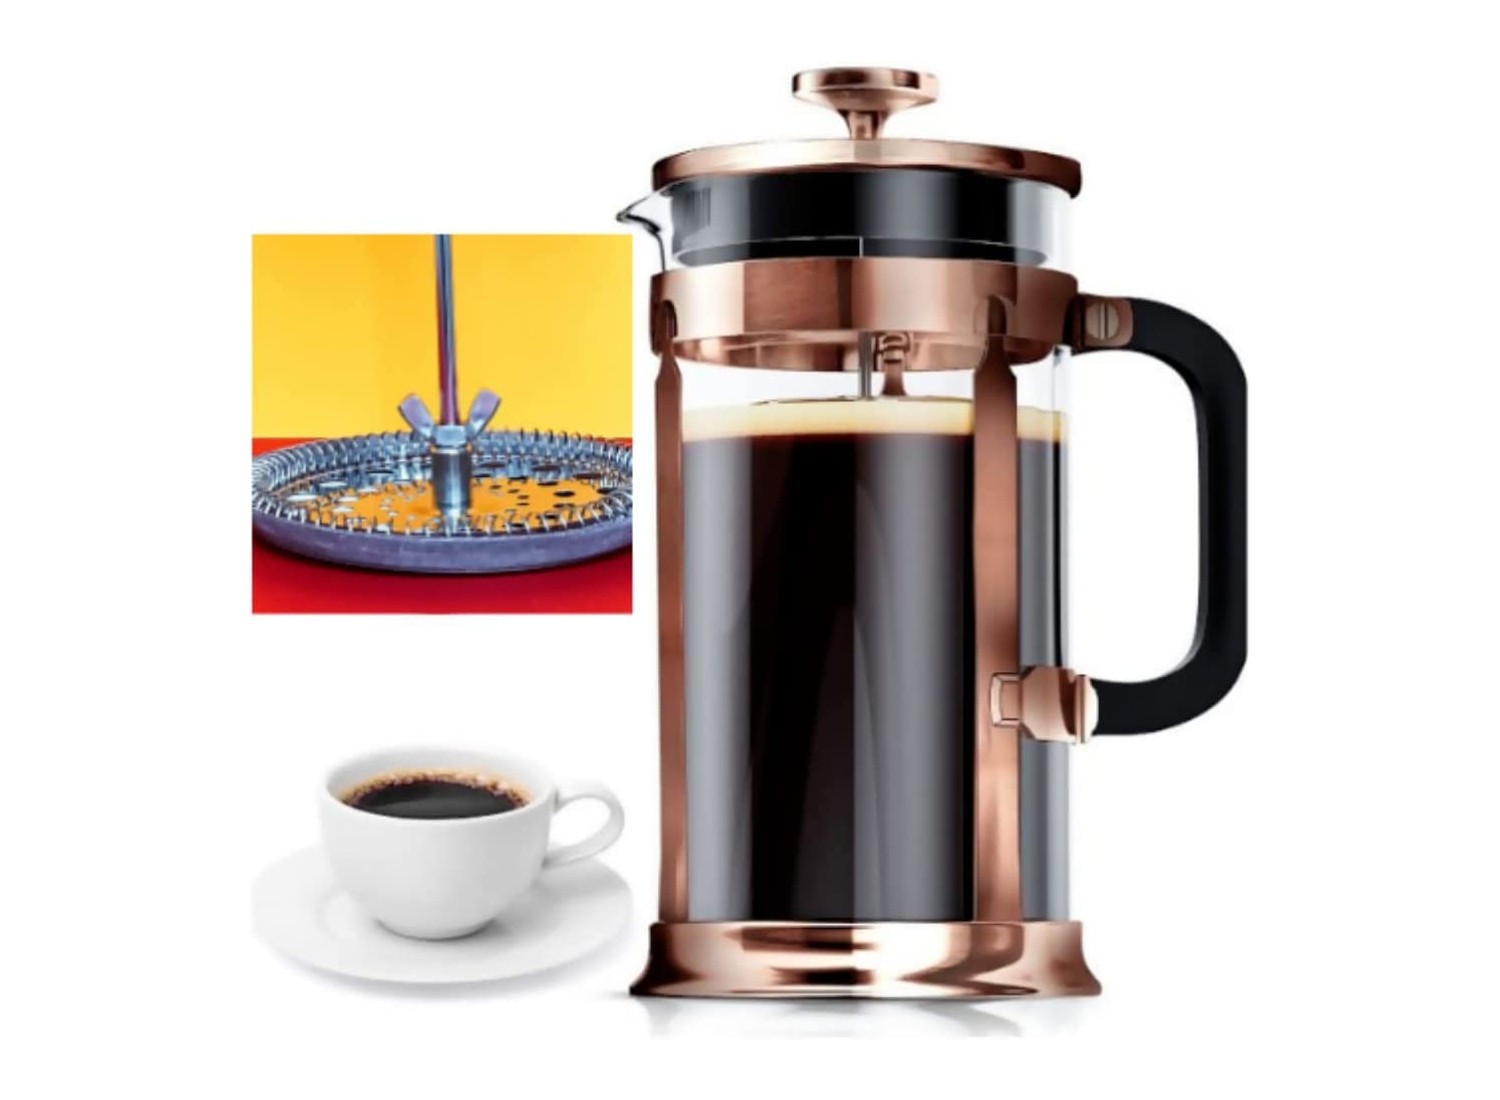 https://www.cuisineathome.com/review/wp-content/uploads/2023/02/coffee-press.jpg